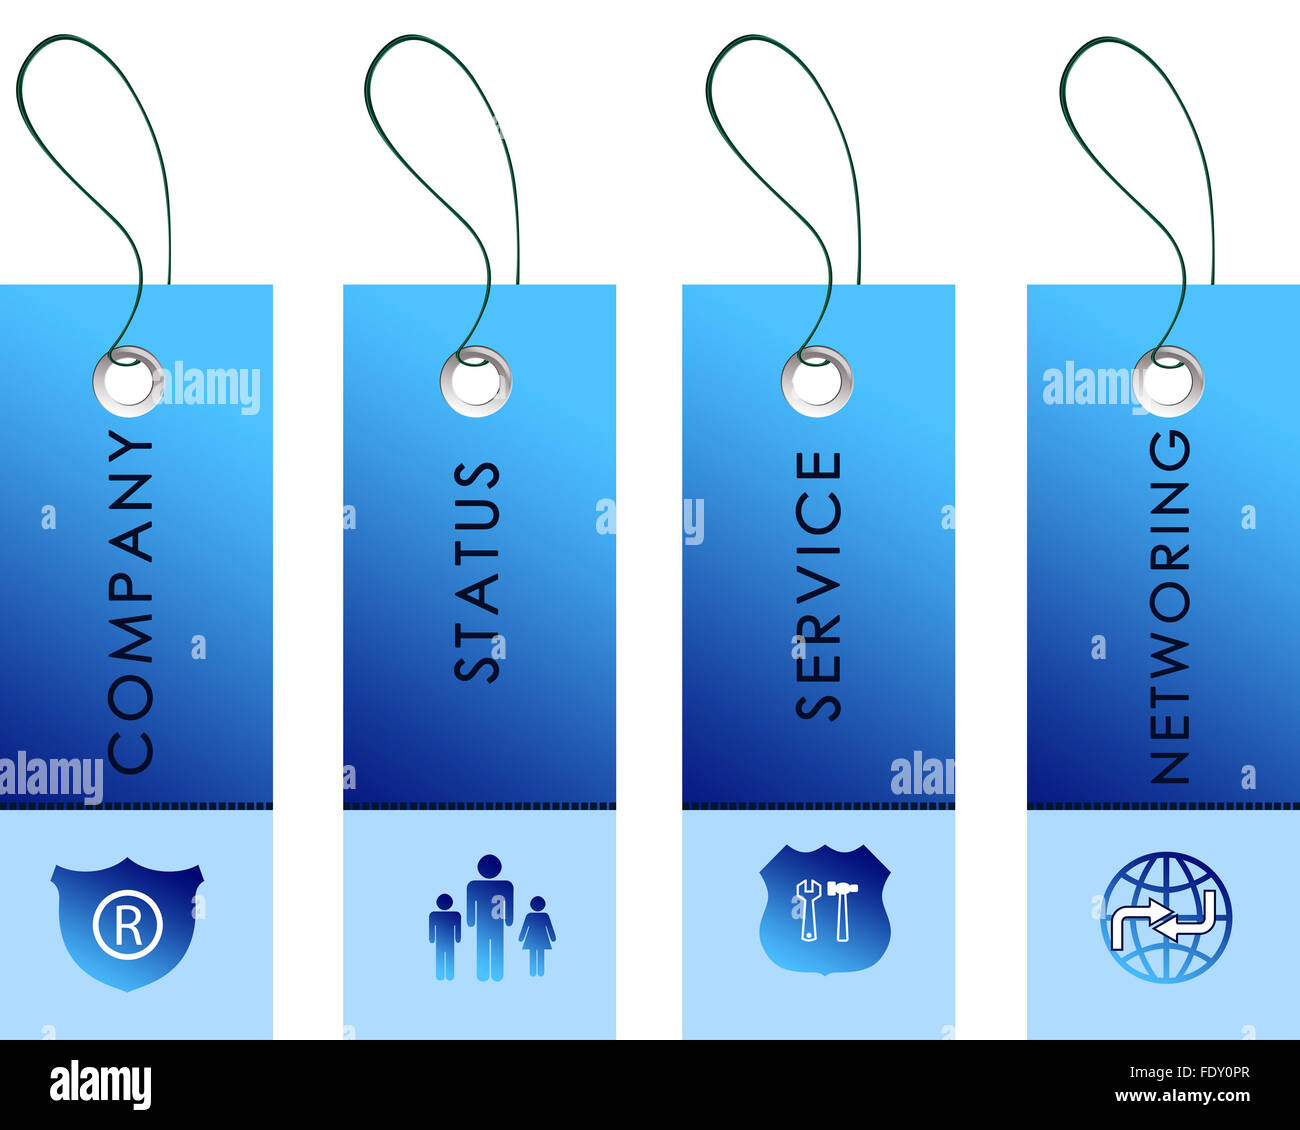 blue labels with communication terms on them Stock Photo